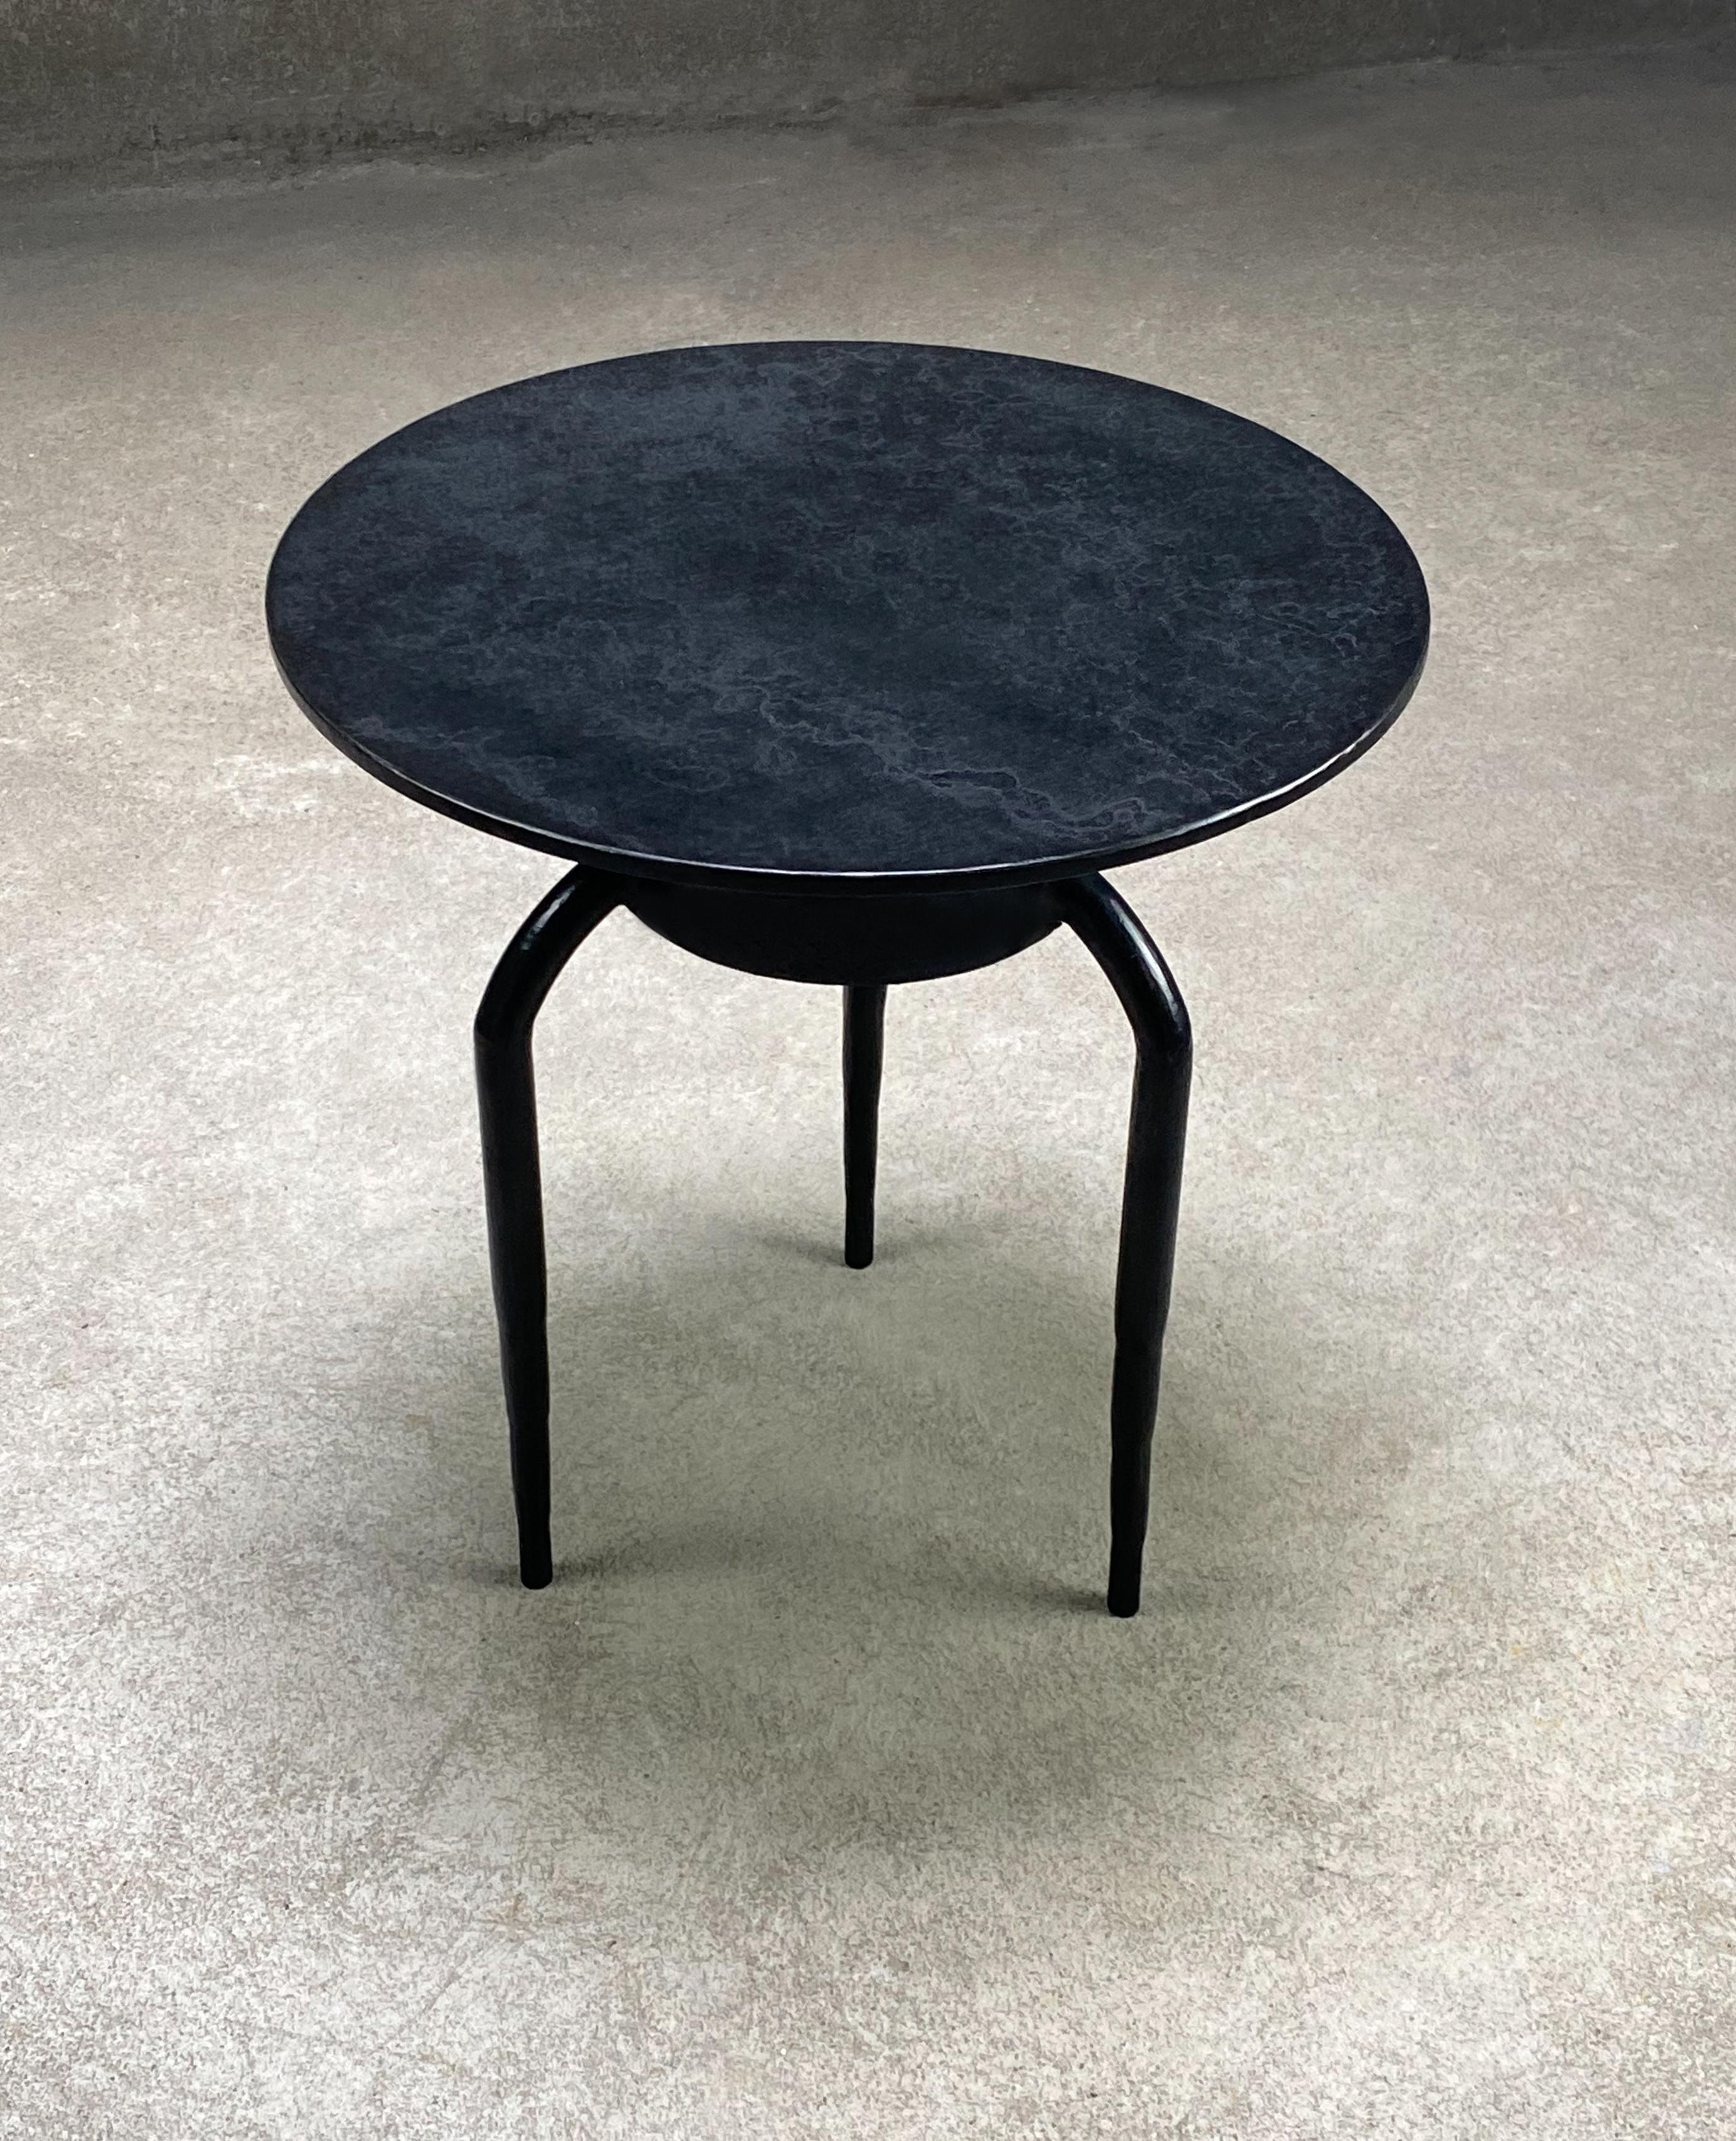 American Black Modern/Contemporary Zinc Finish Steel Side Table Round Aged Spiderlegs For Sale